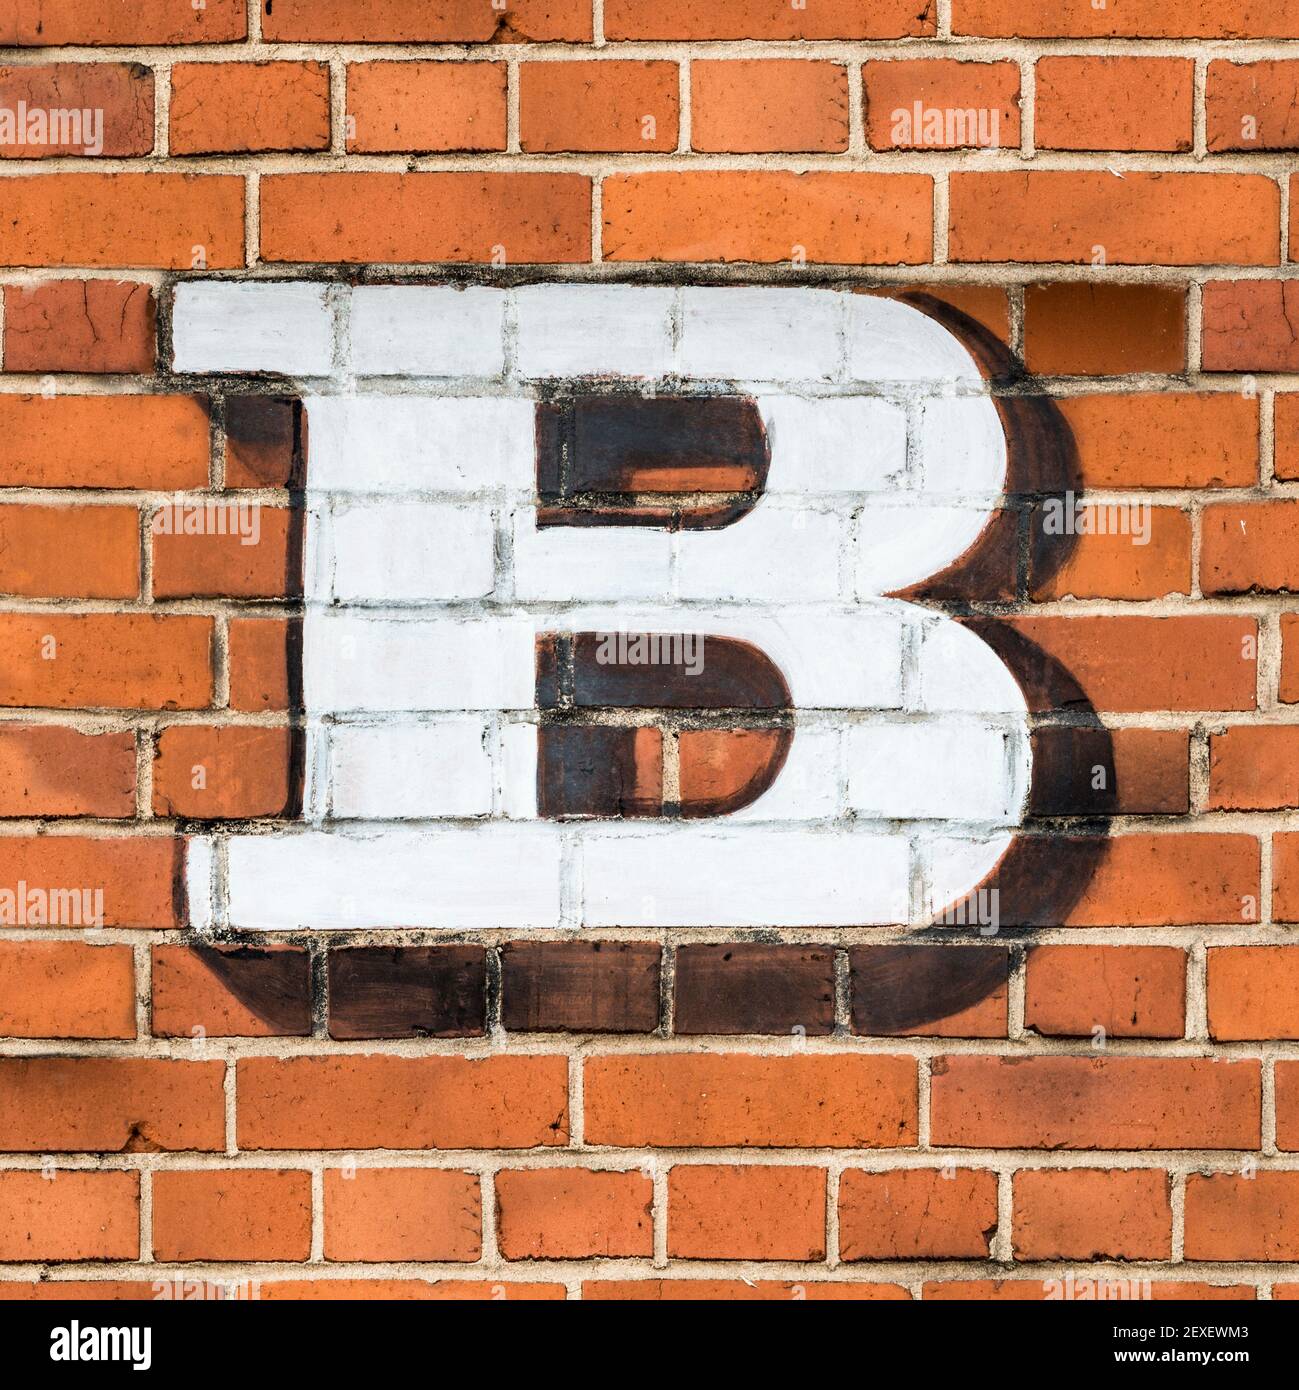 A white capital letter B painted on a red brick wall Stock Photo